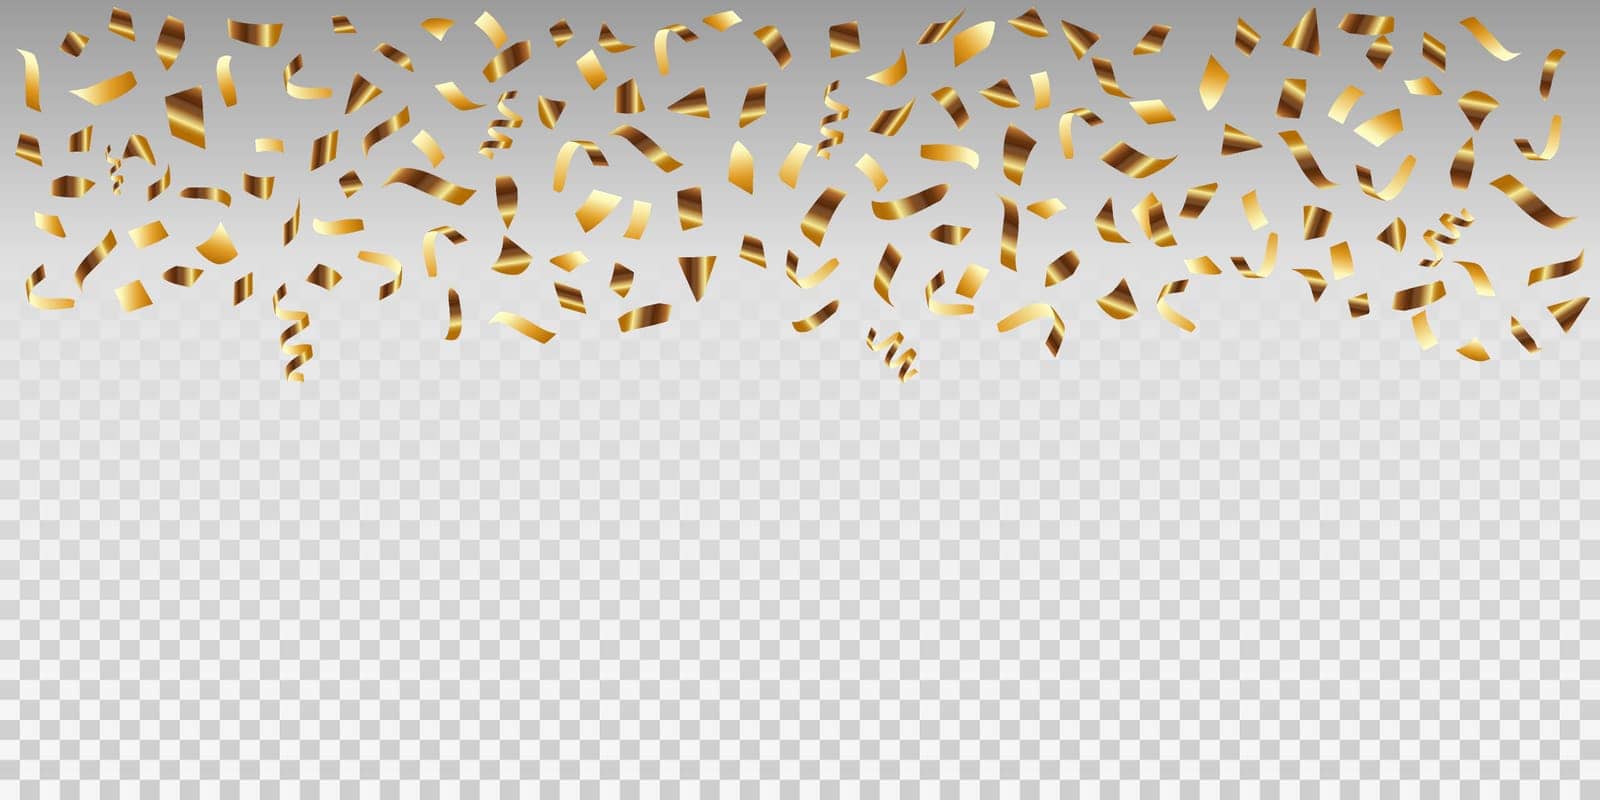 Serpentine pieces falling down. Festive overlay effect. Transparent background. Vector illustration.